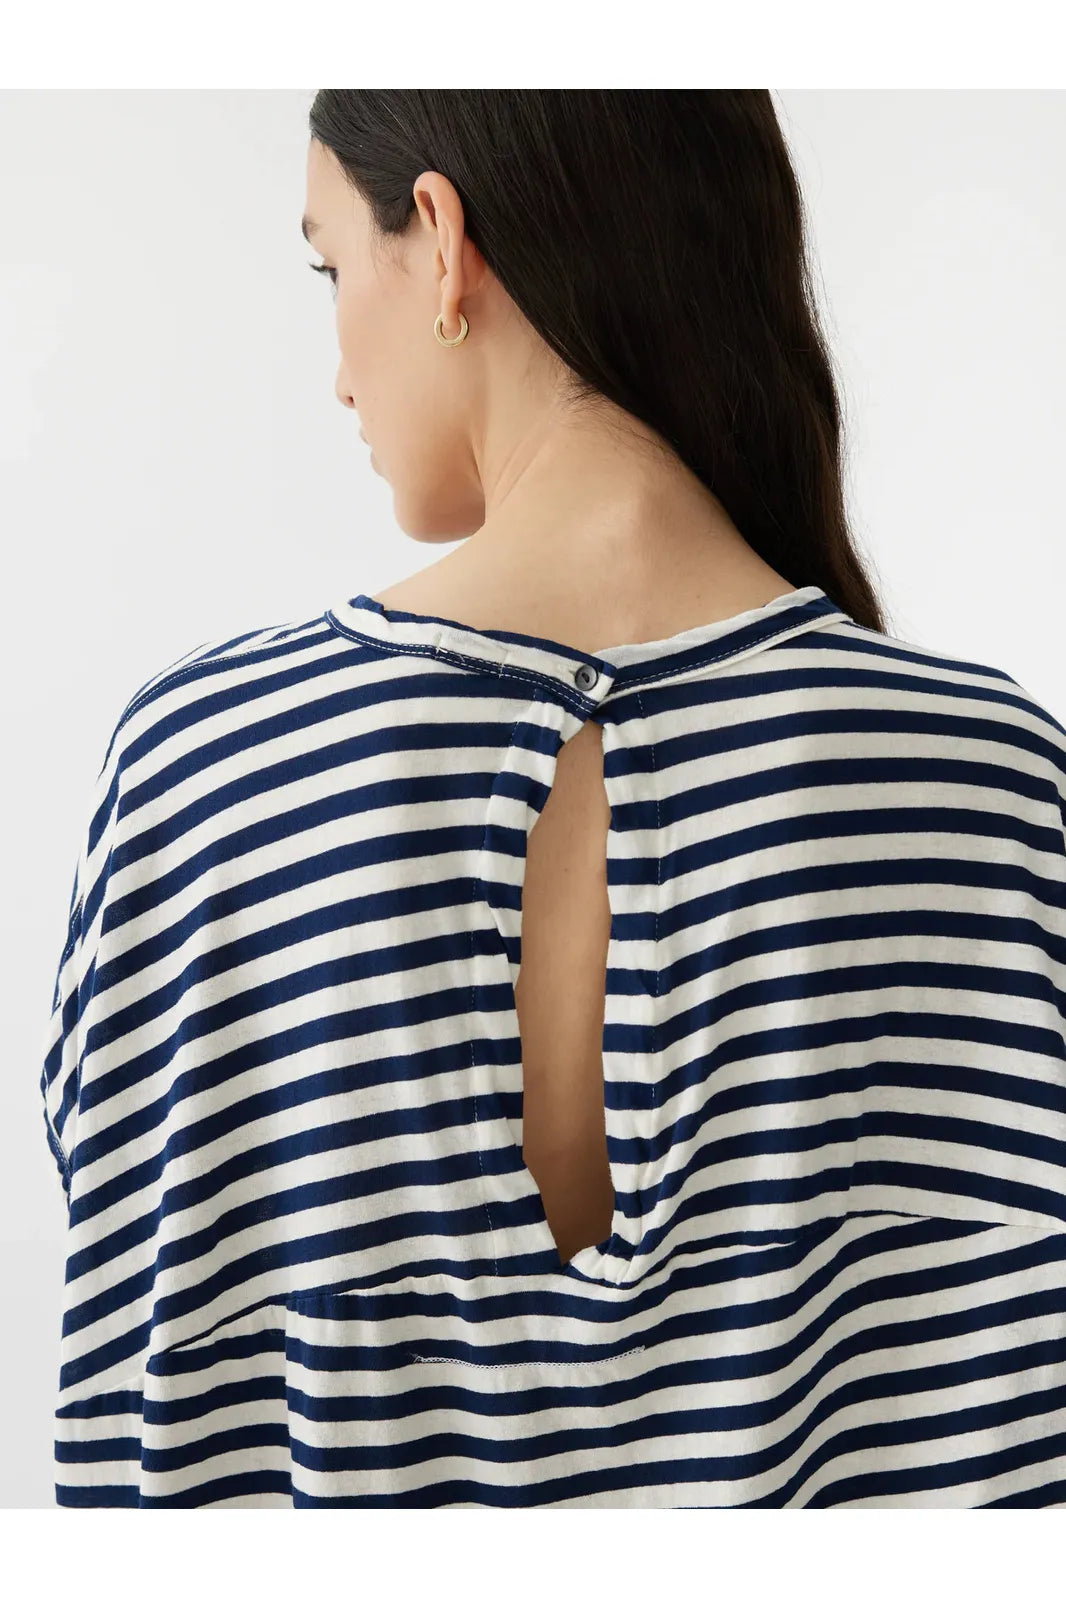 Stripe Slouch Circle Tank in Navy/ Undyed by Bassike